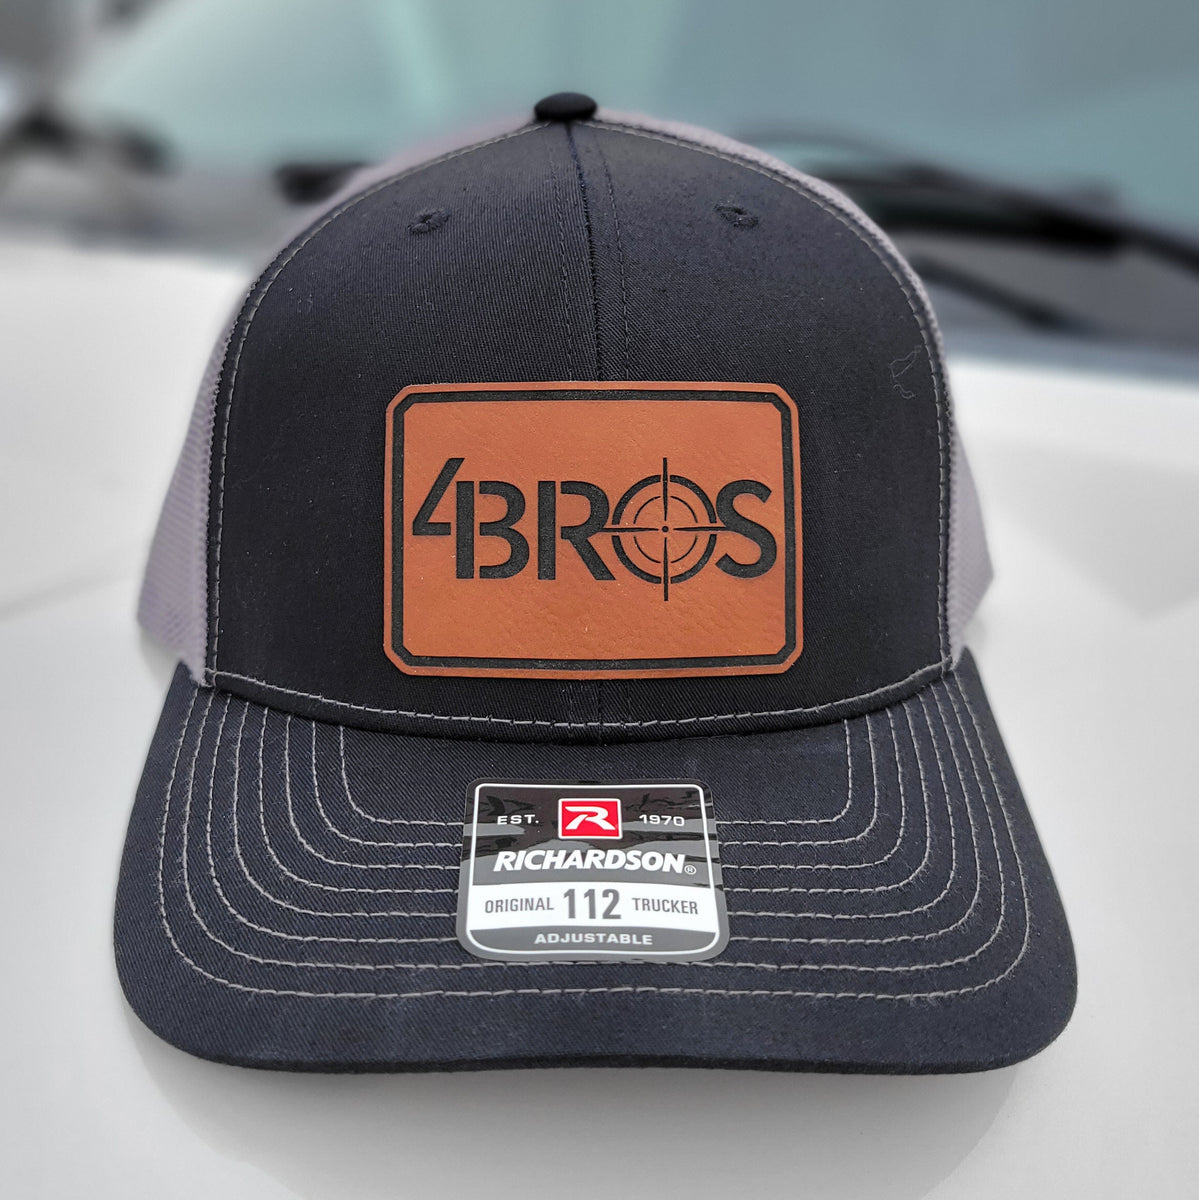 4Bros Trucker Hat – Four Brothers